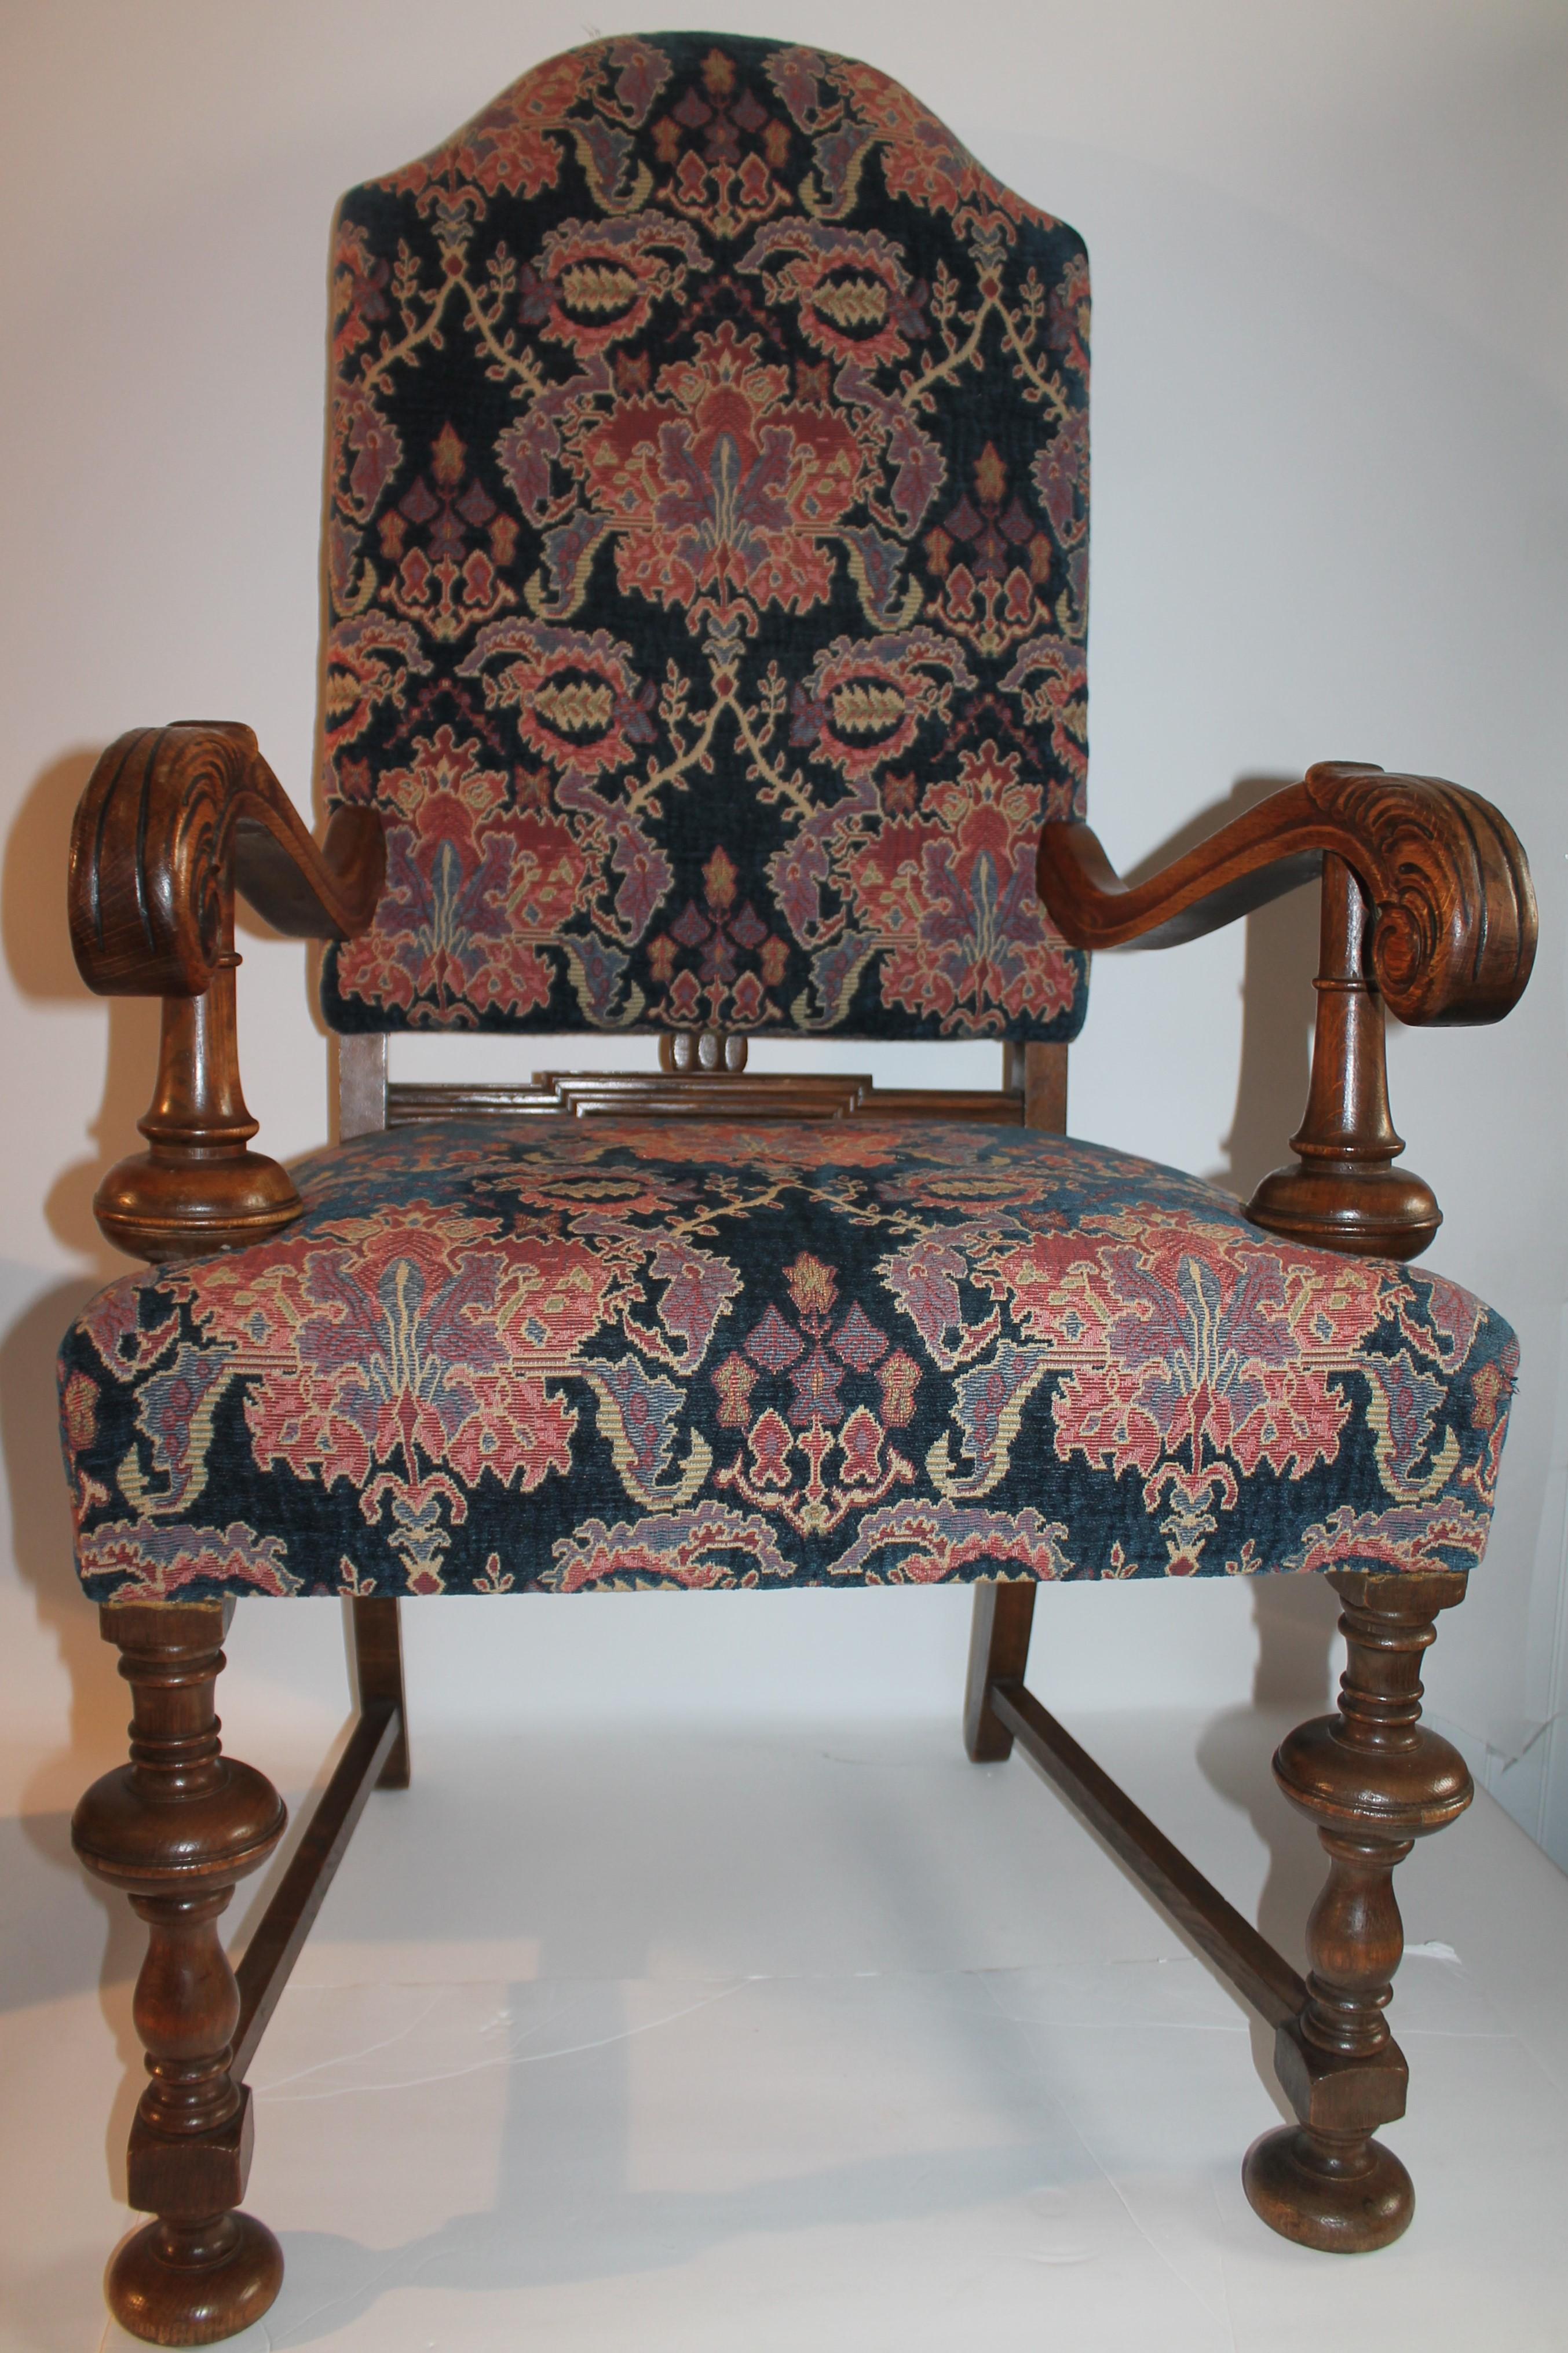 Fantastic 19Th c hand carved Italian arm chair with amazing mohair fabric. The arms are hand carved as well as the legs. The condition is pristine.